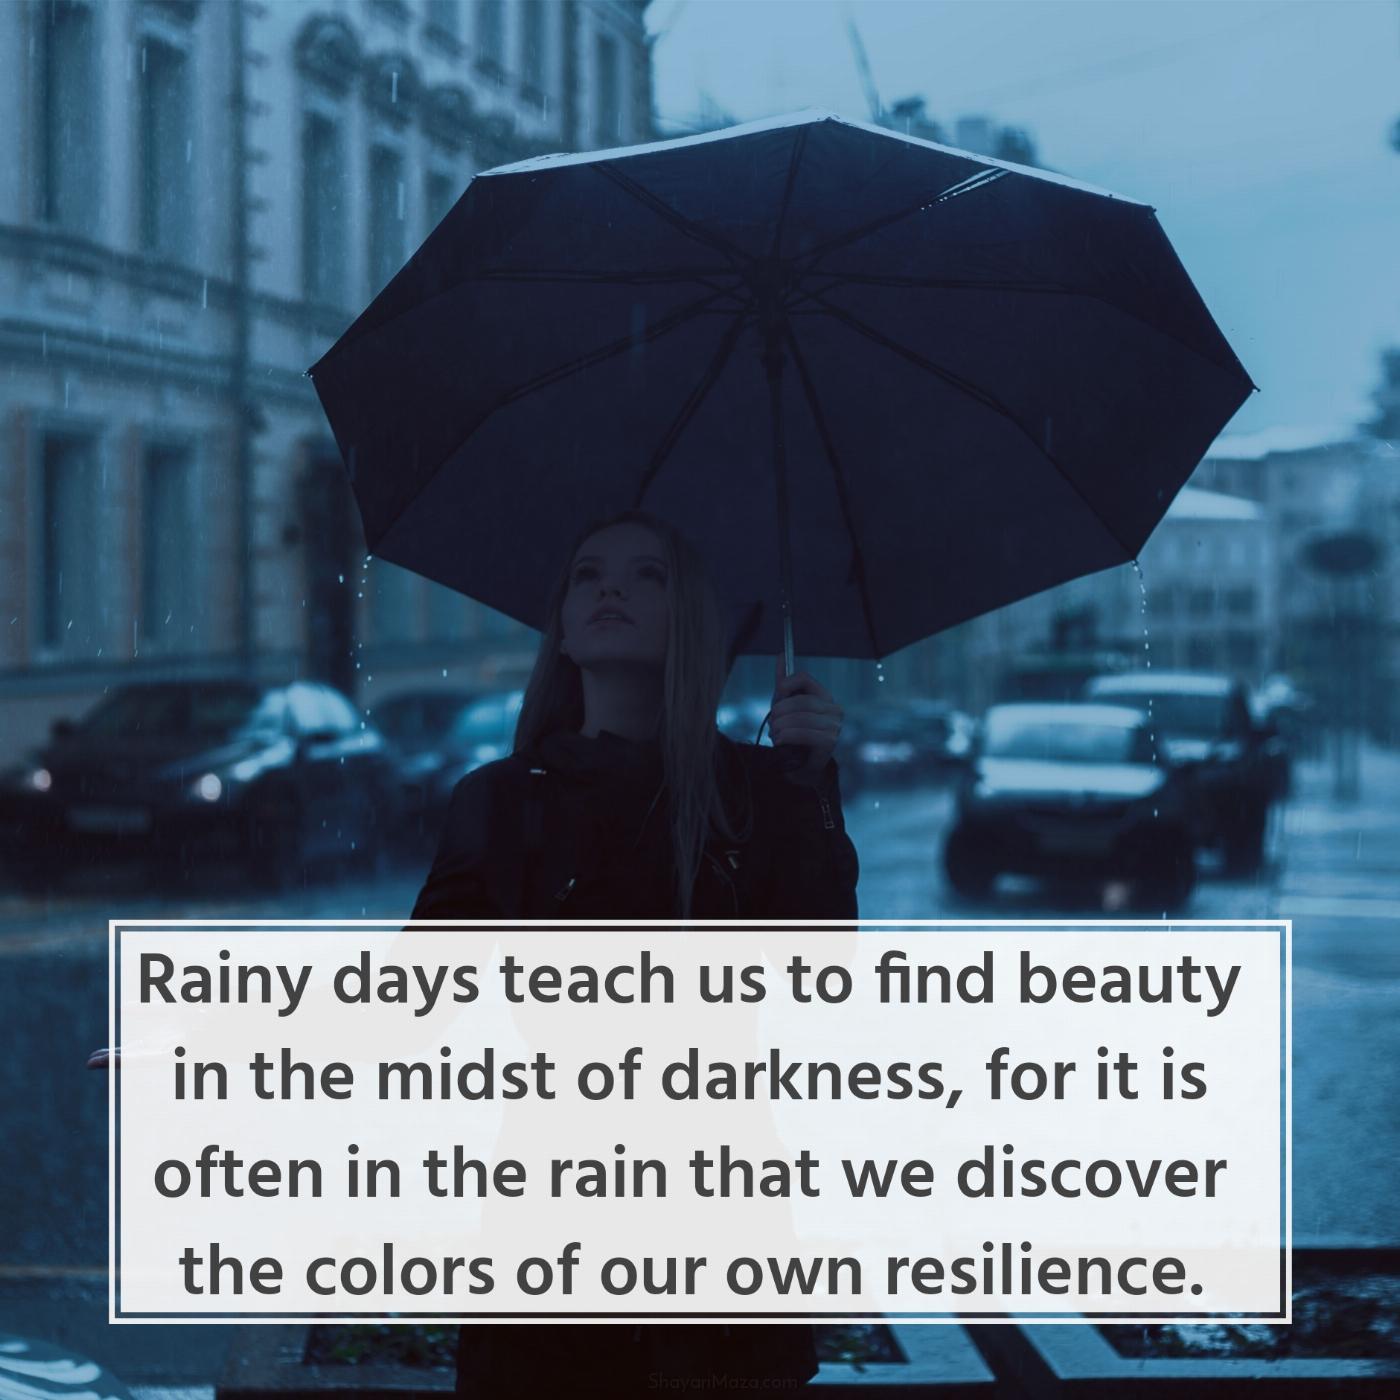 Rainy days teach us to find beauty in the midst of darkness